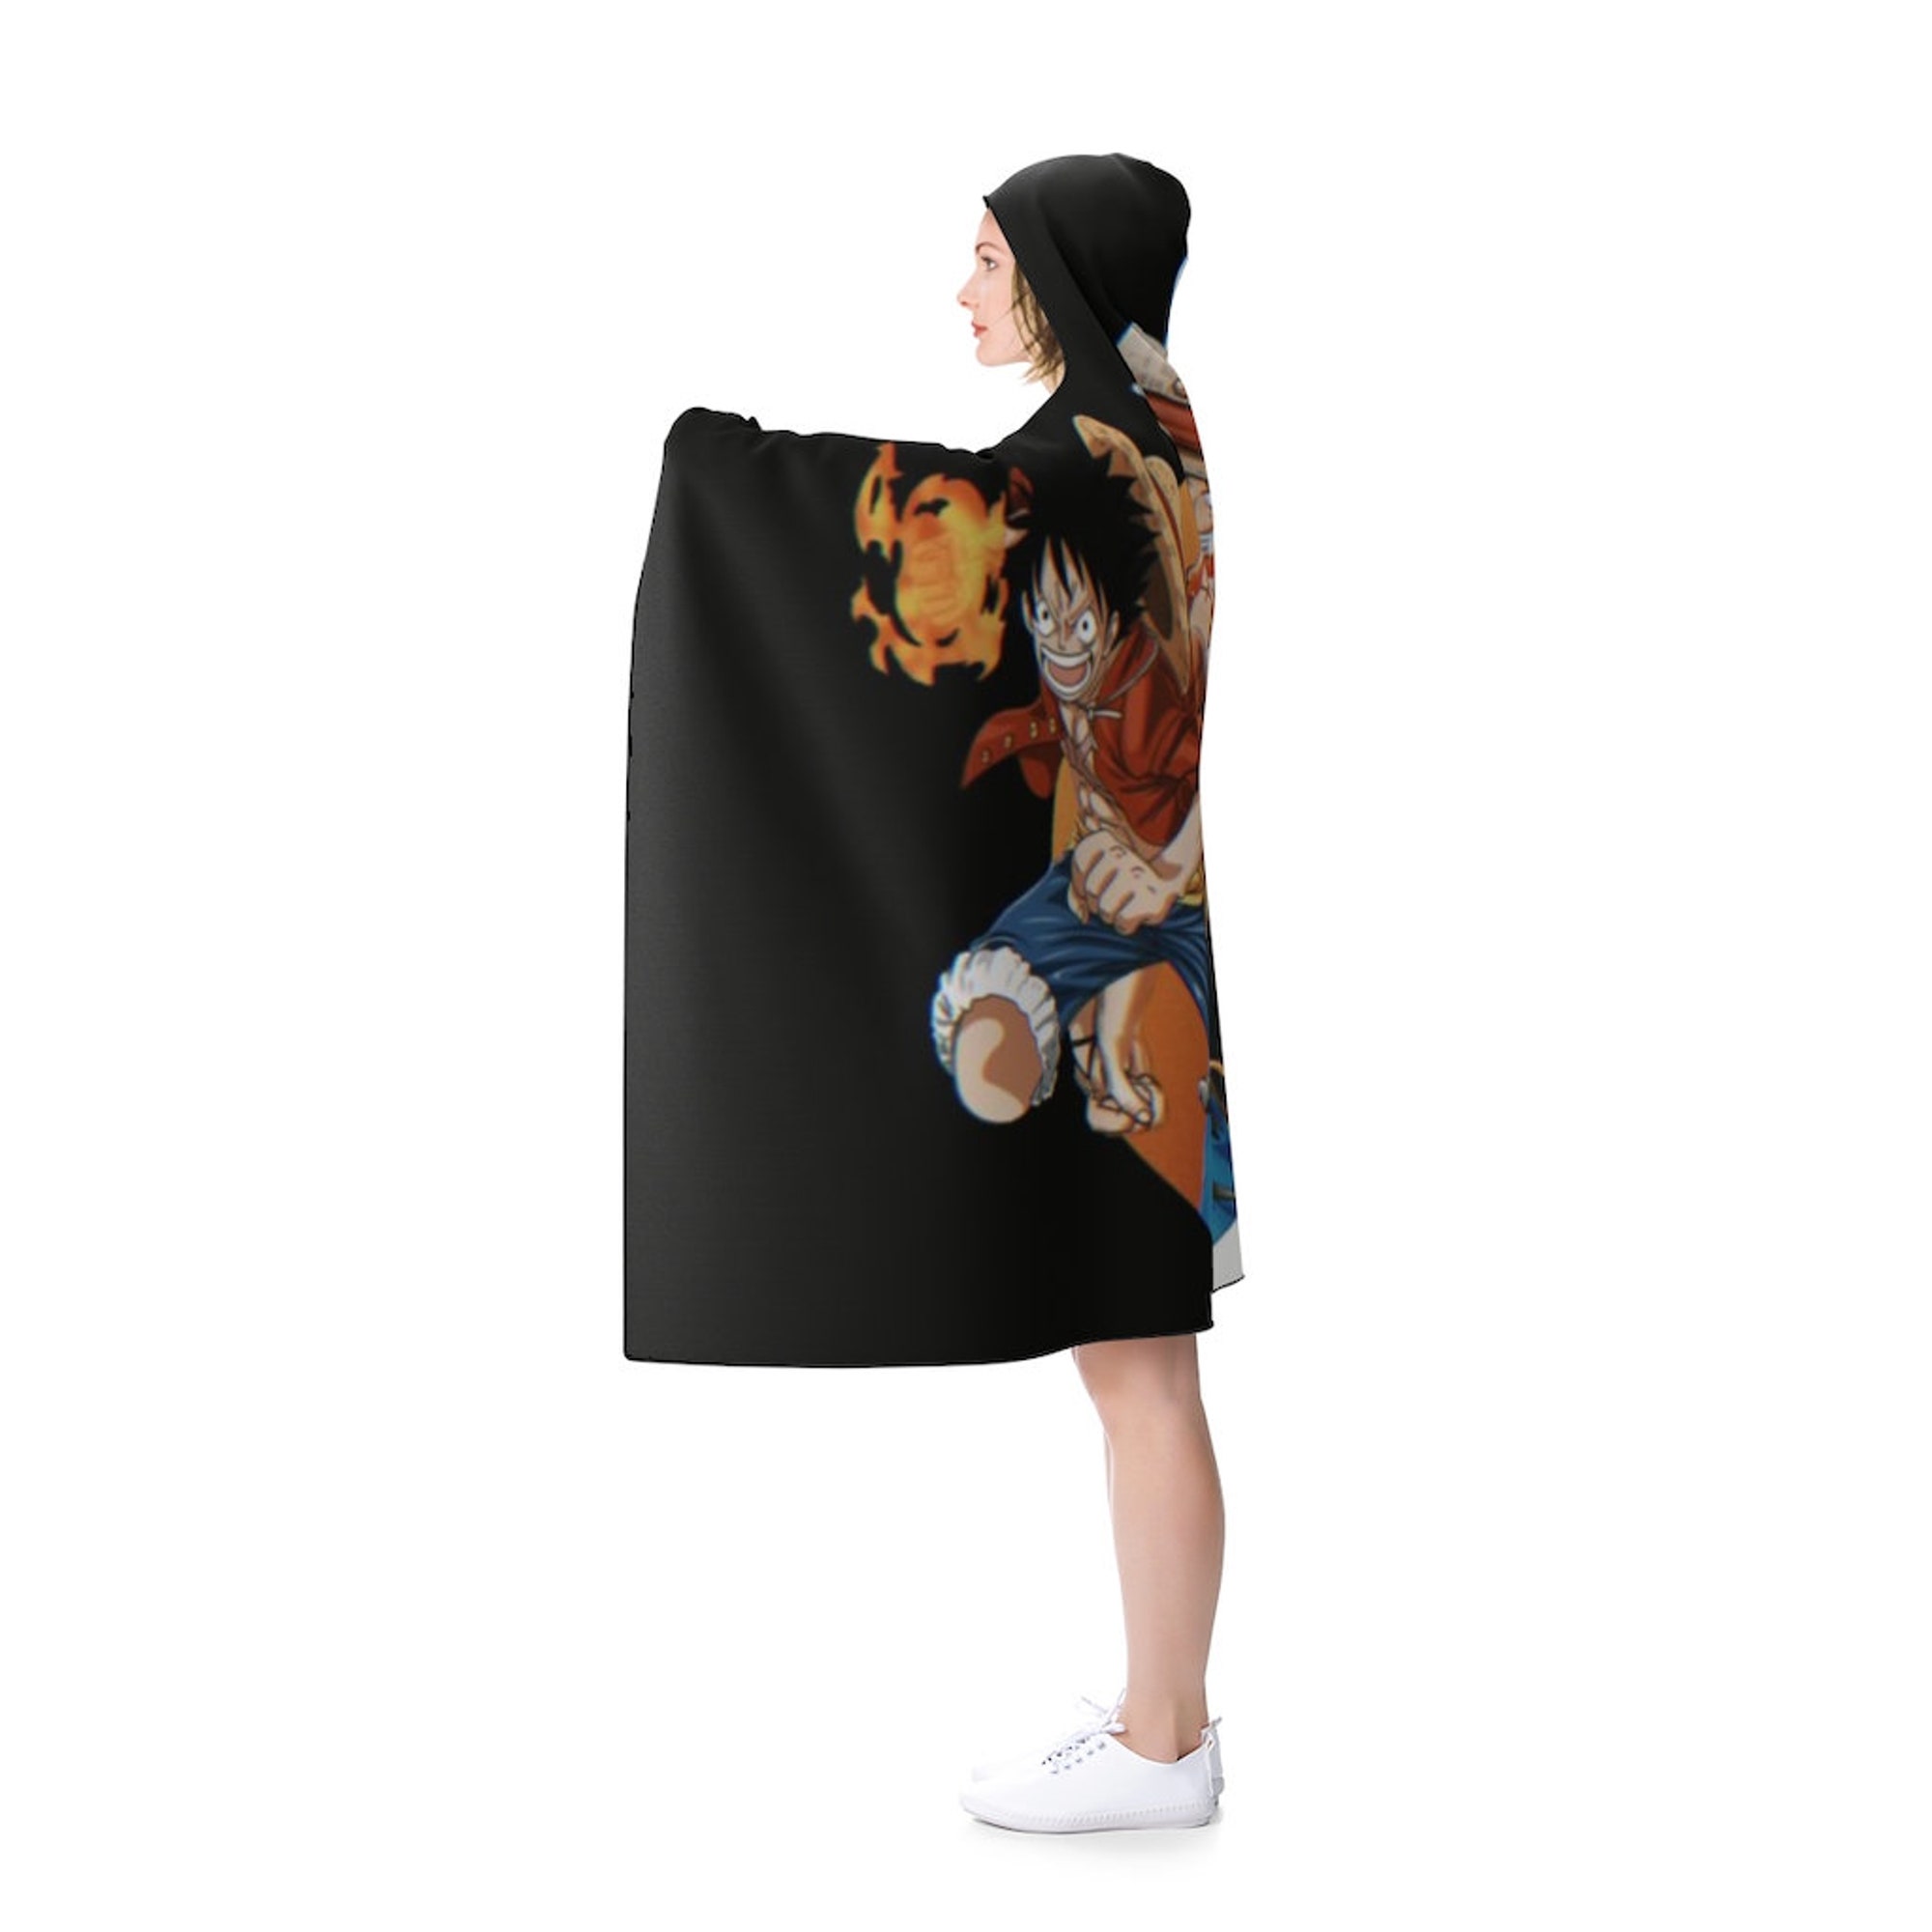 Hooded Blanket anime one piece